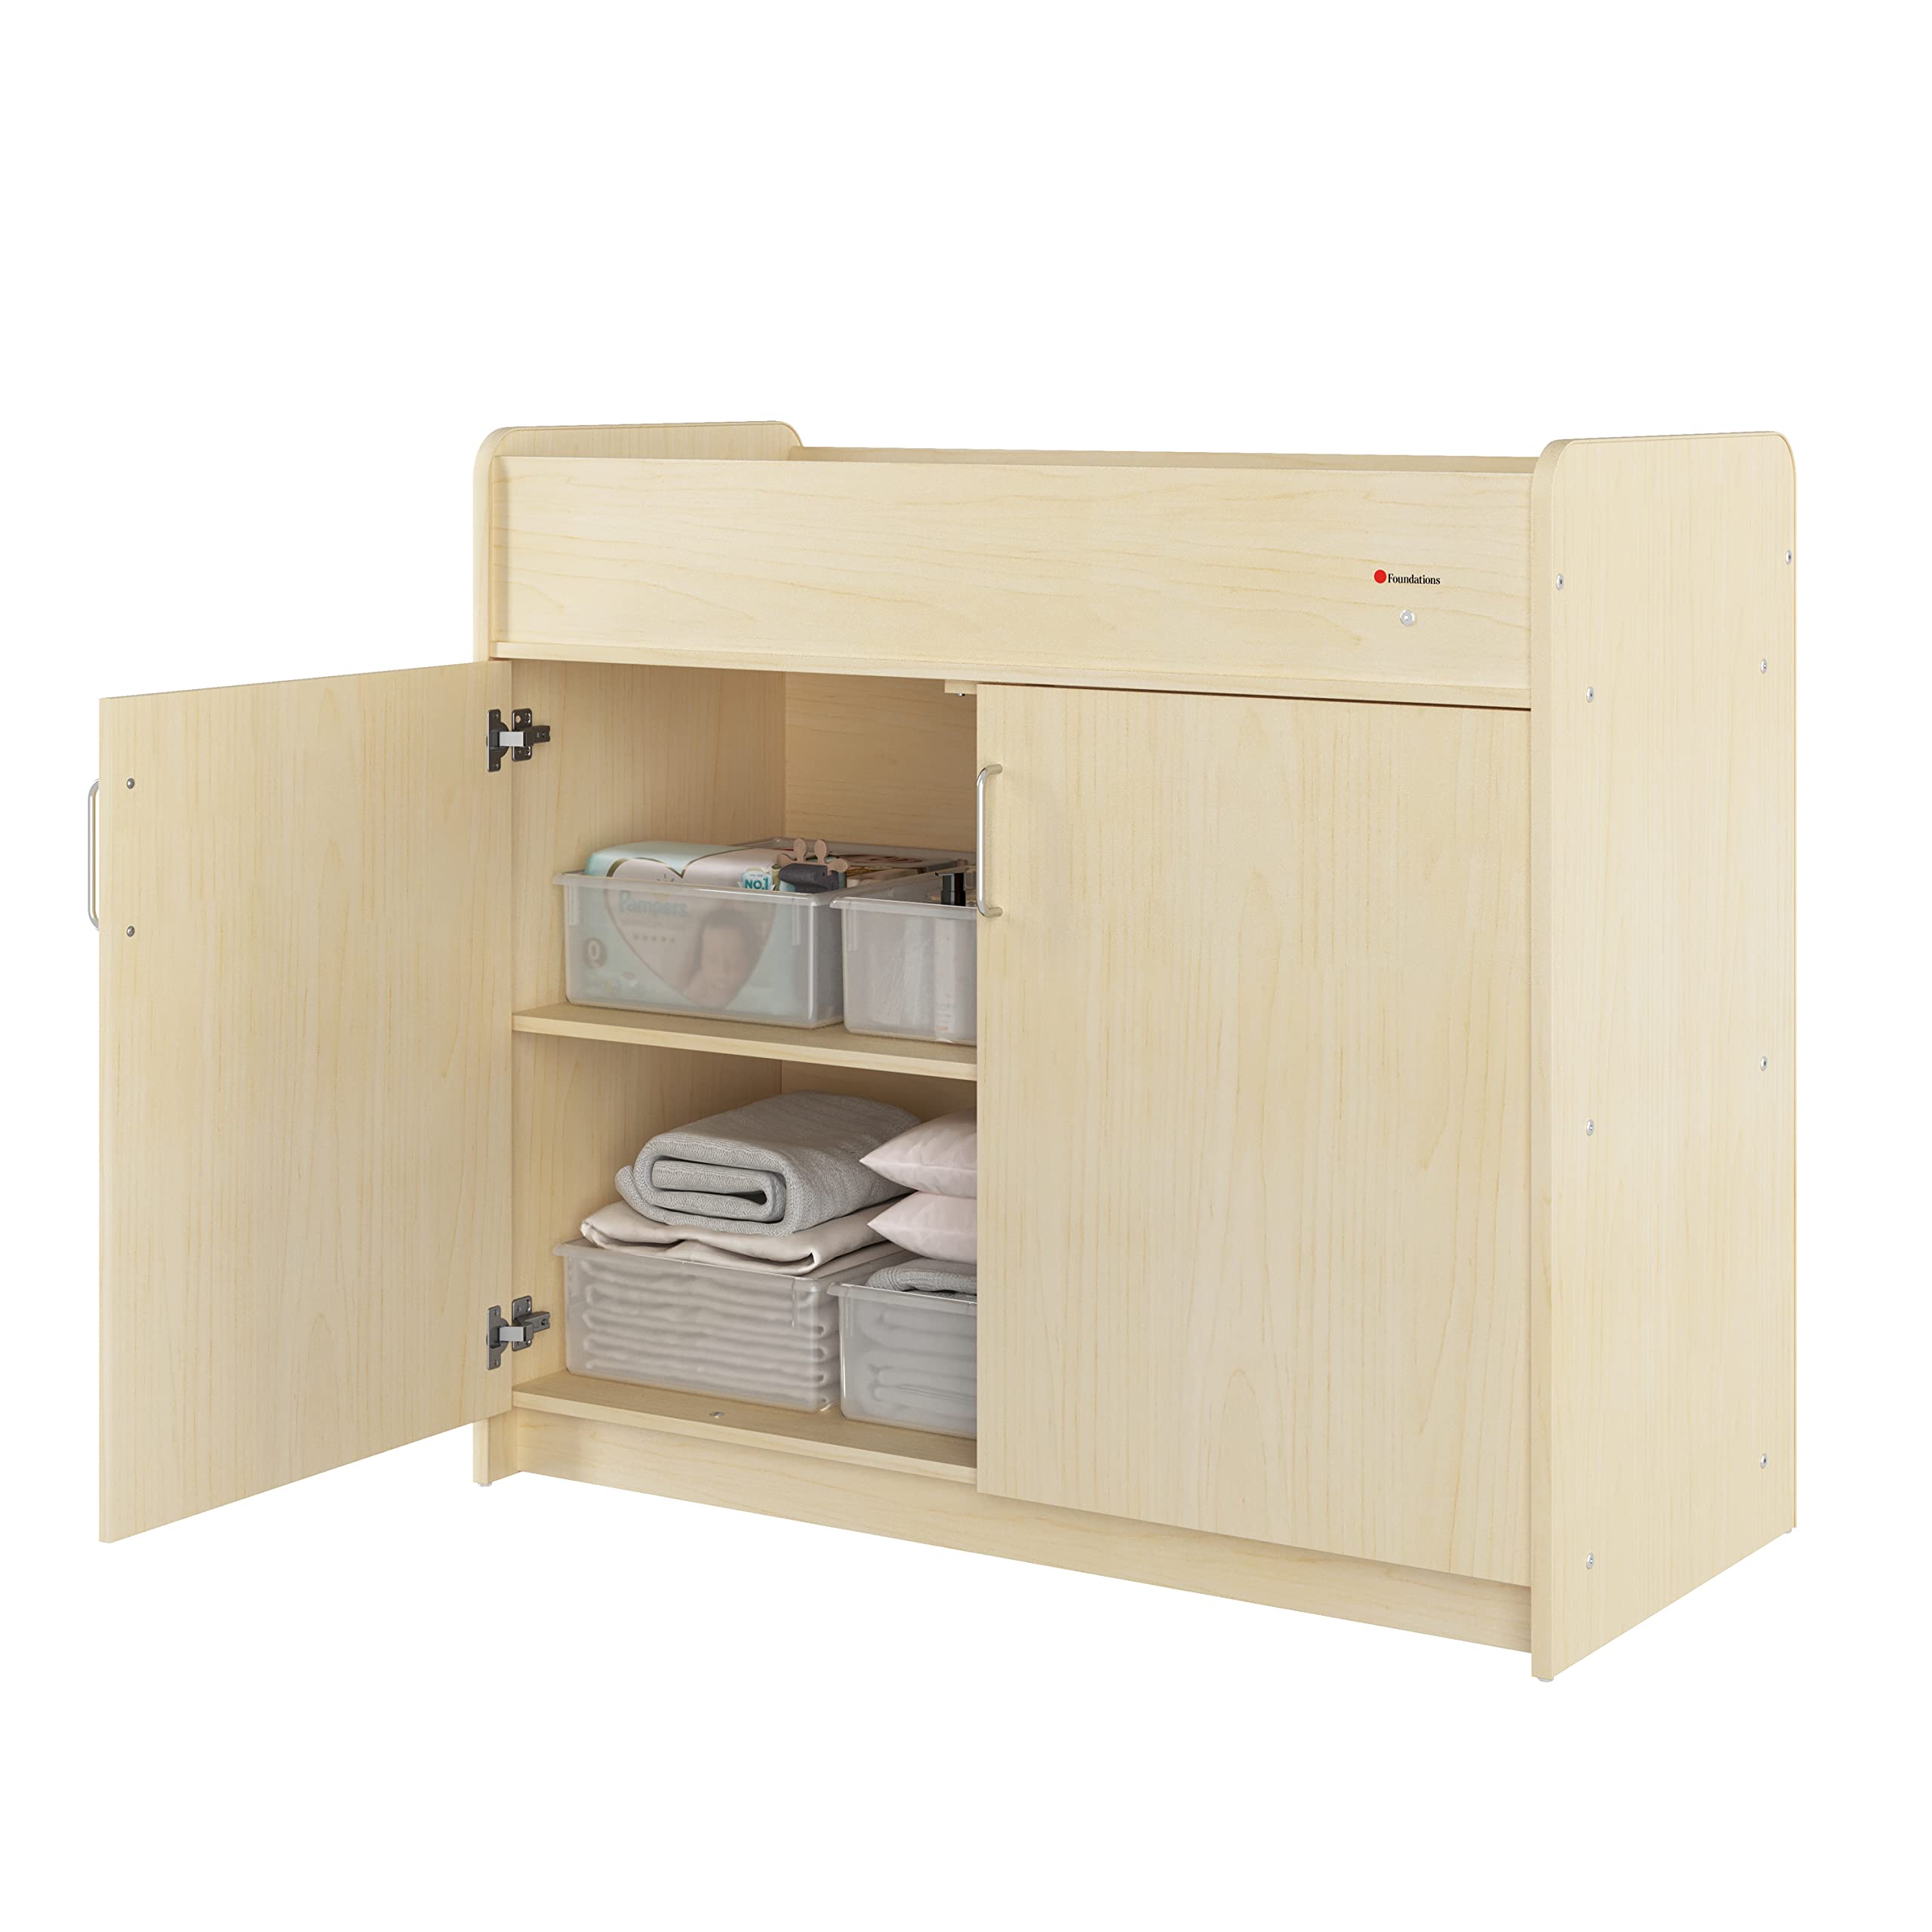 Foundations SafetyCraft Daycare Changing Table, Natural